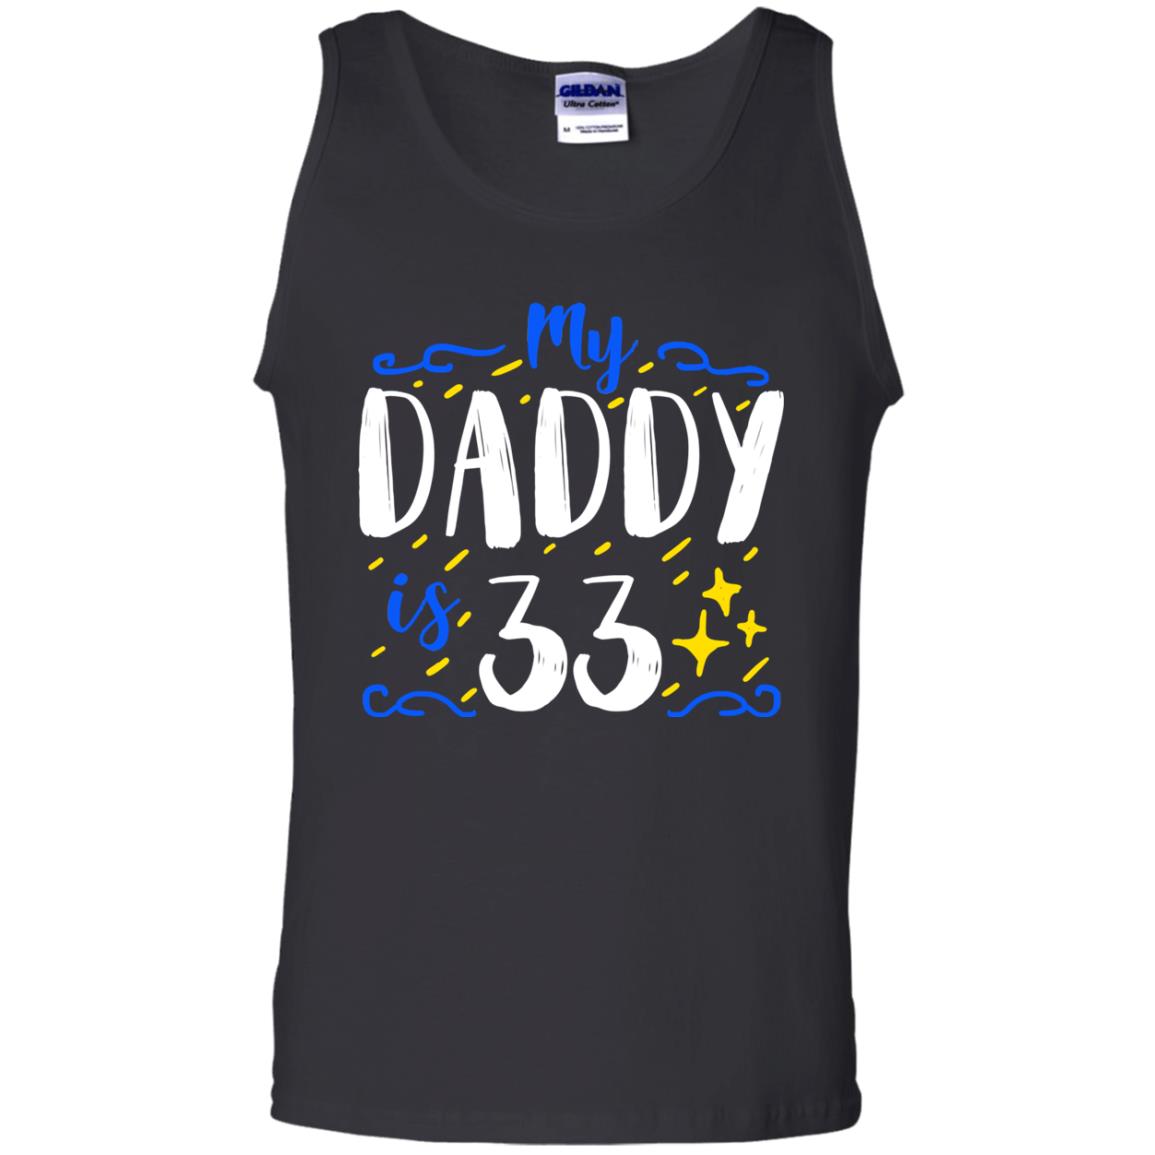 My Daddy Is 33 33rd Birthday Daddy Shirt For Sons Or DaughtersG220 Gildan 100% Cotton Tank Top